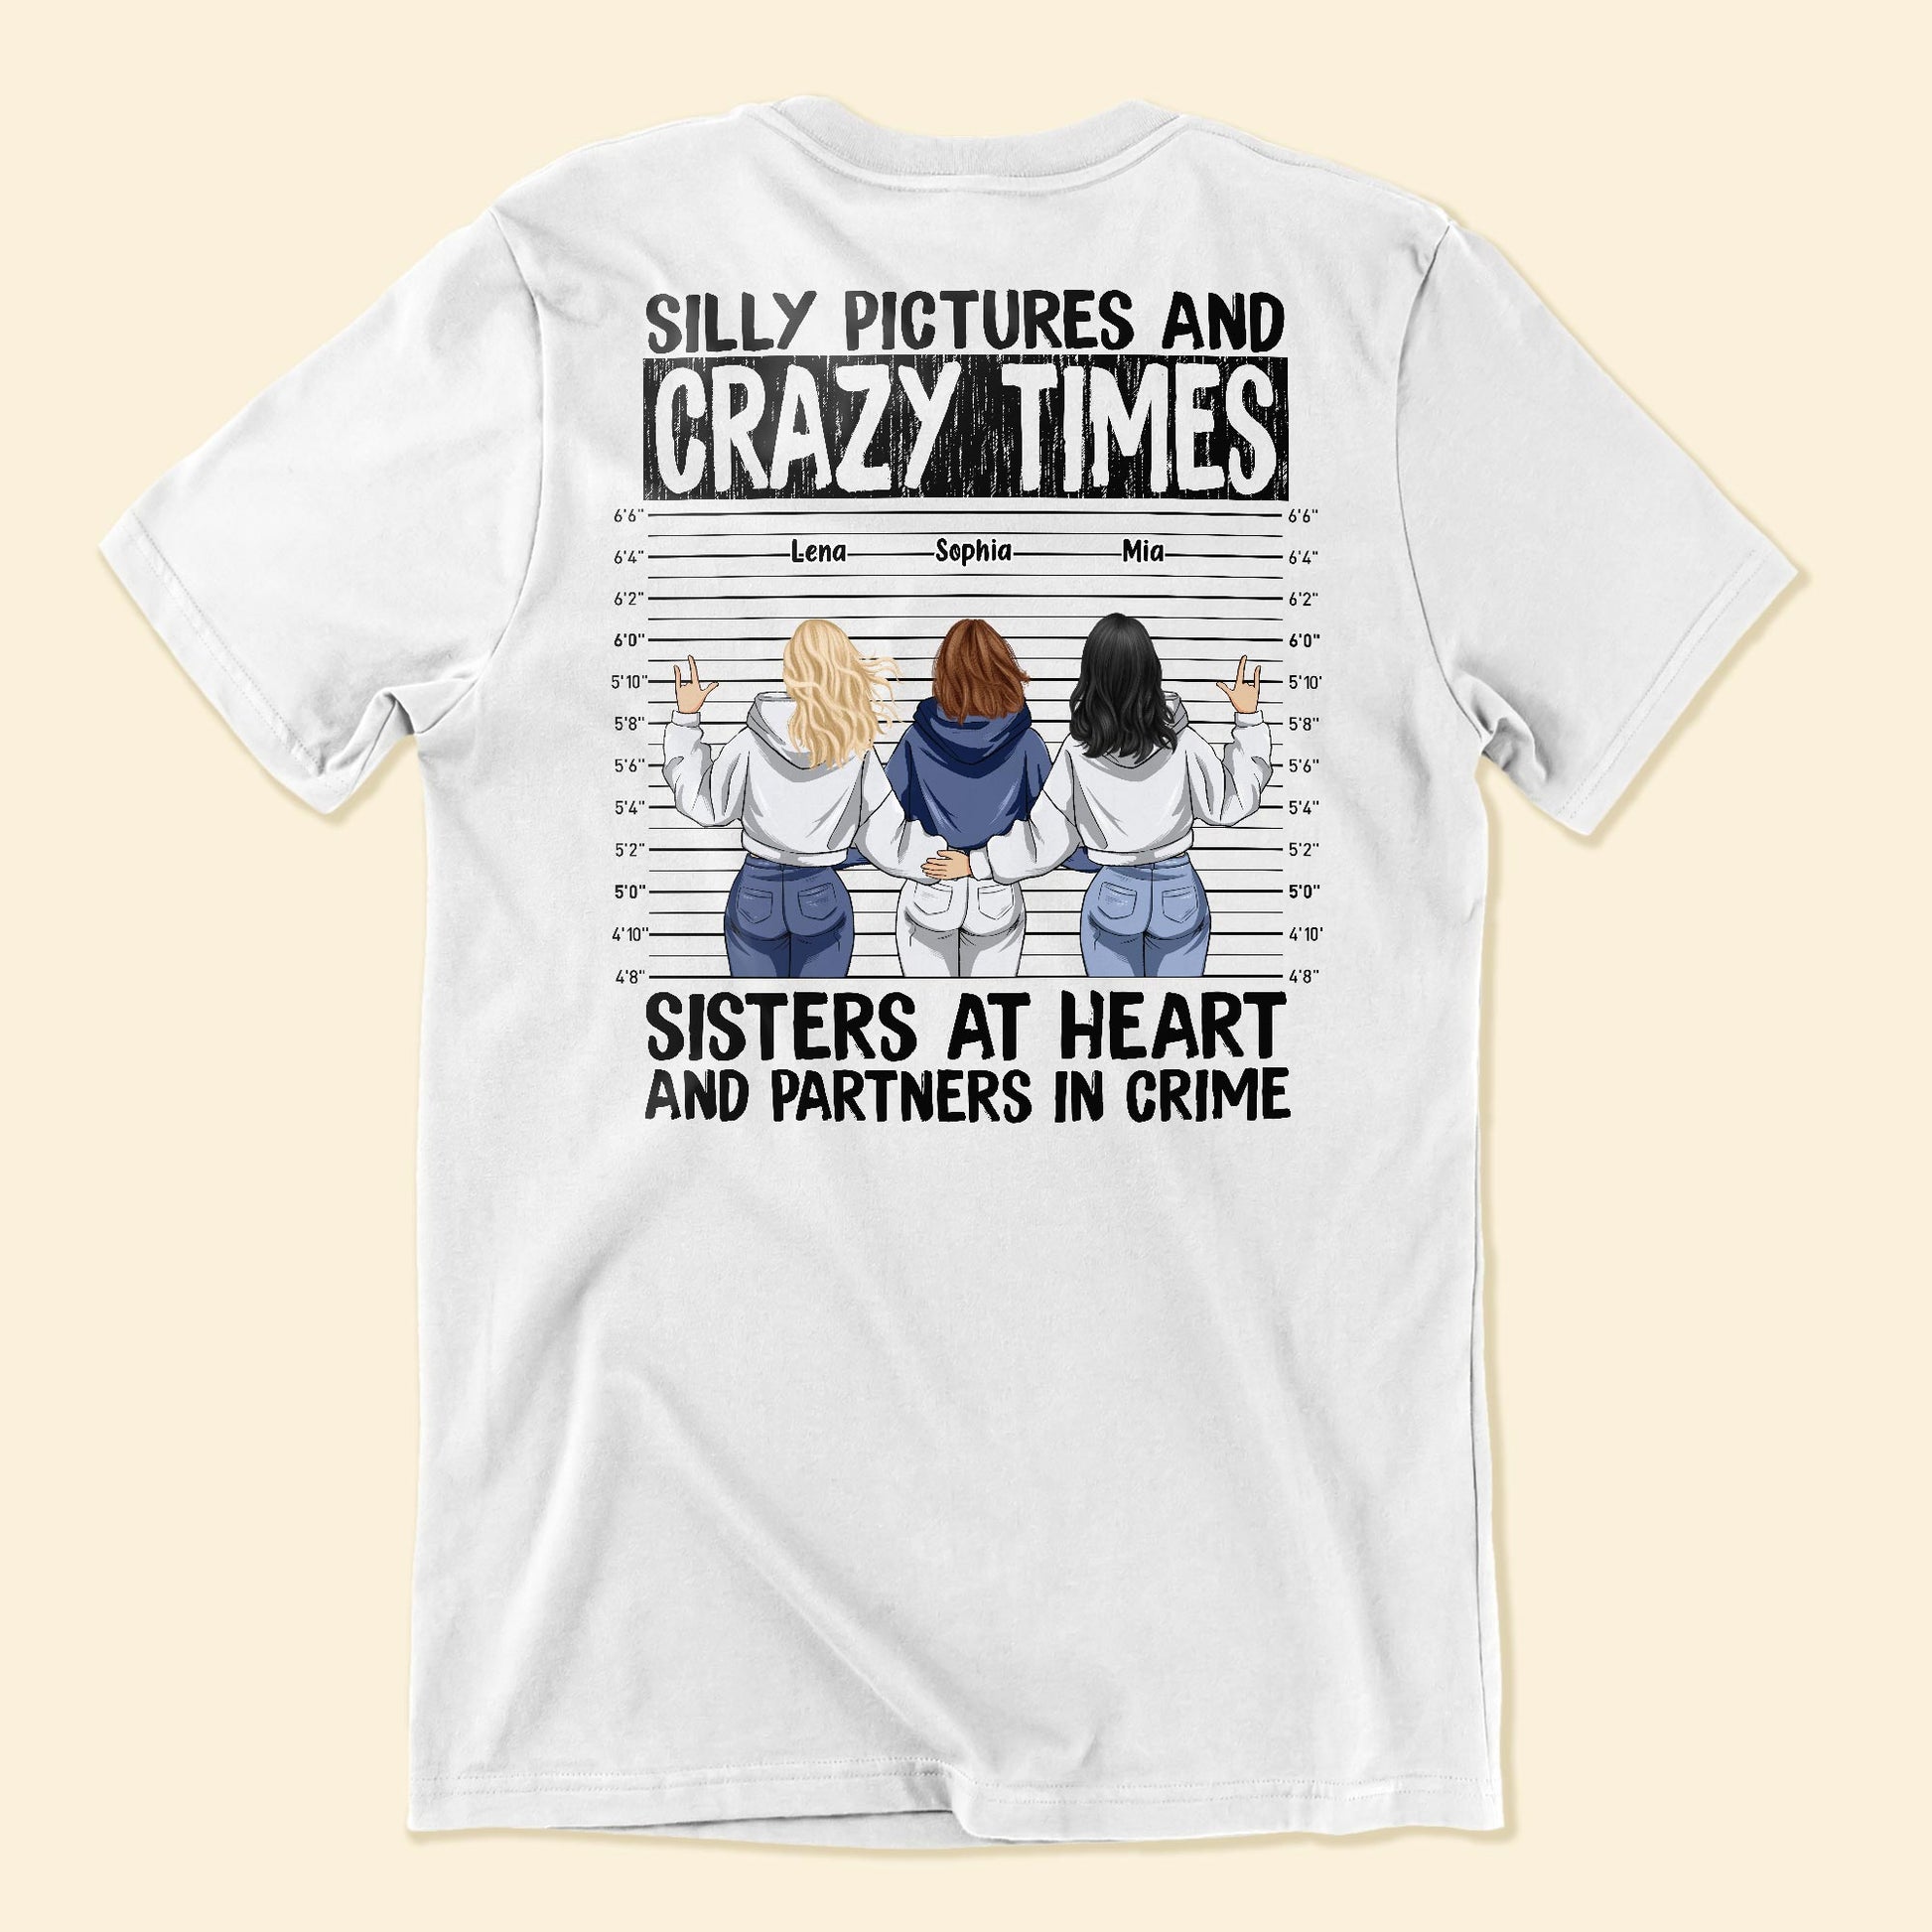 Silly Pictures Crazy Times Sisters At Heart Partners In Crime - Personalized Shirt - Funny Birthday Friendship Gift For Besties, BFF, Best Friends, Soul Sisters